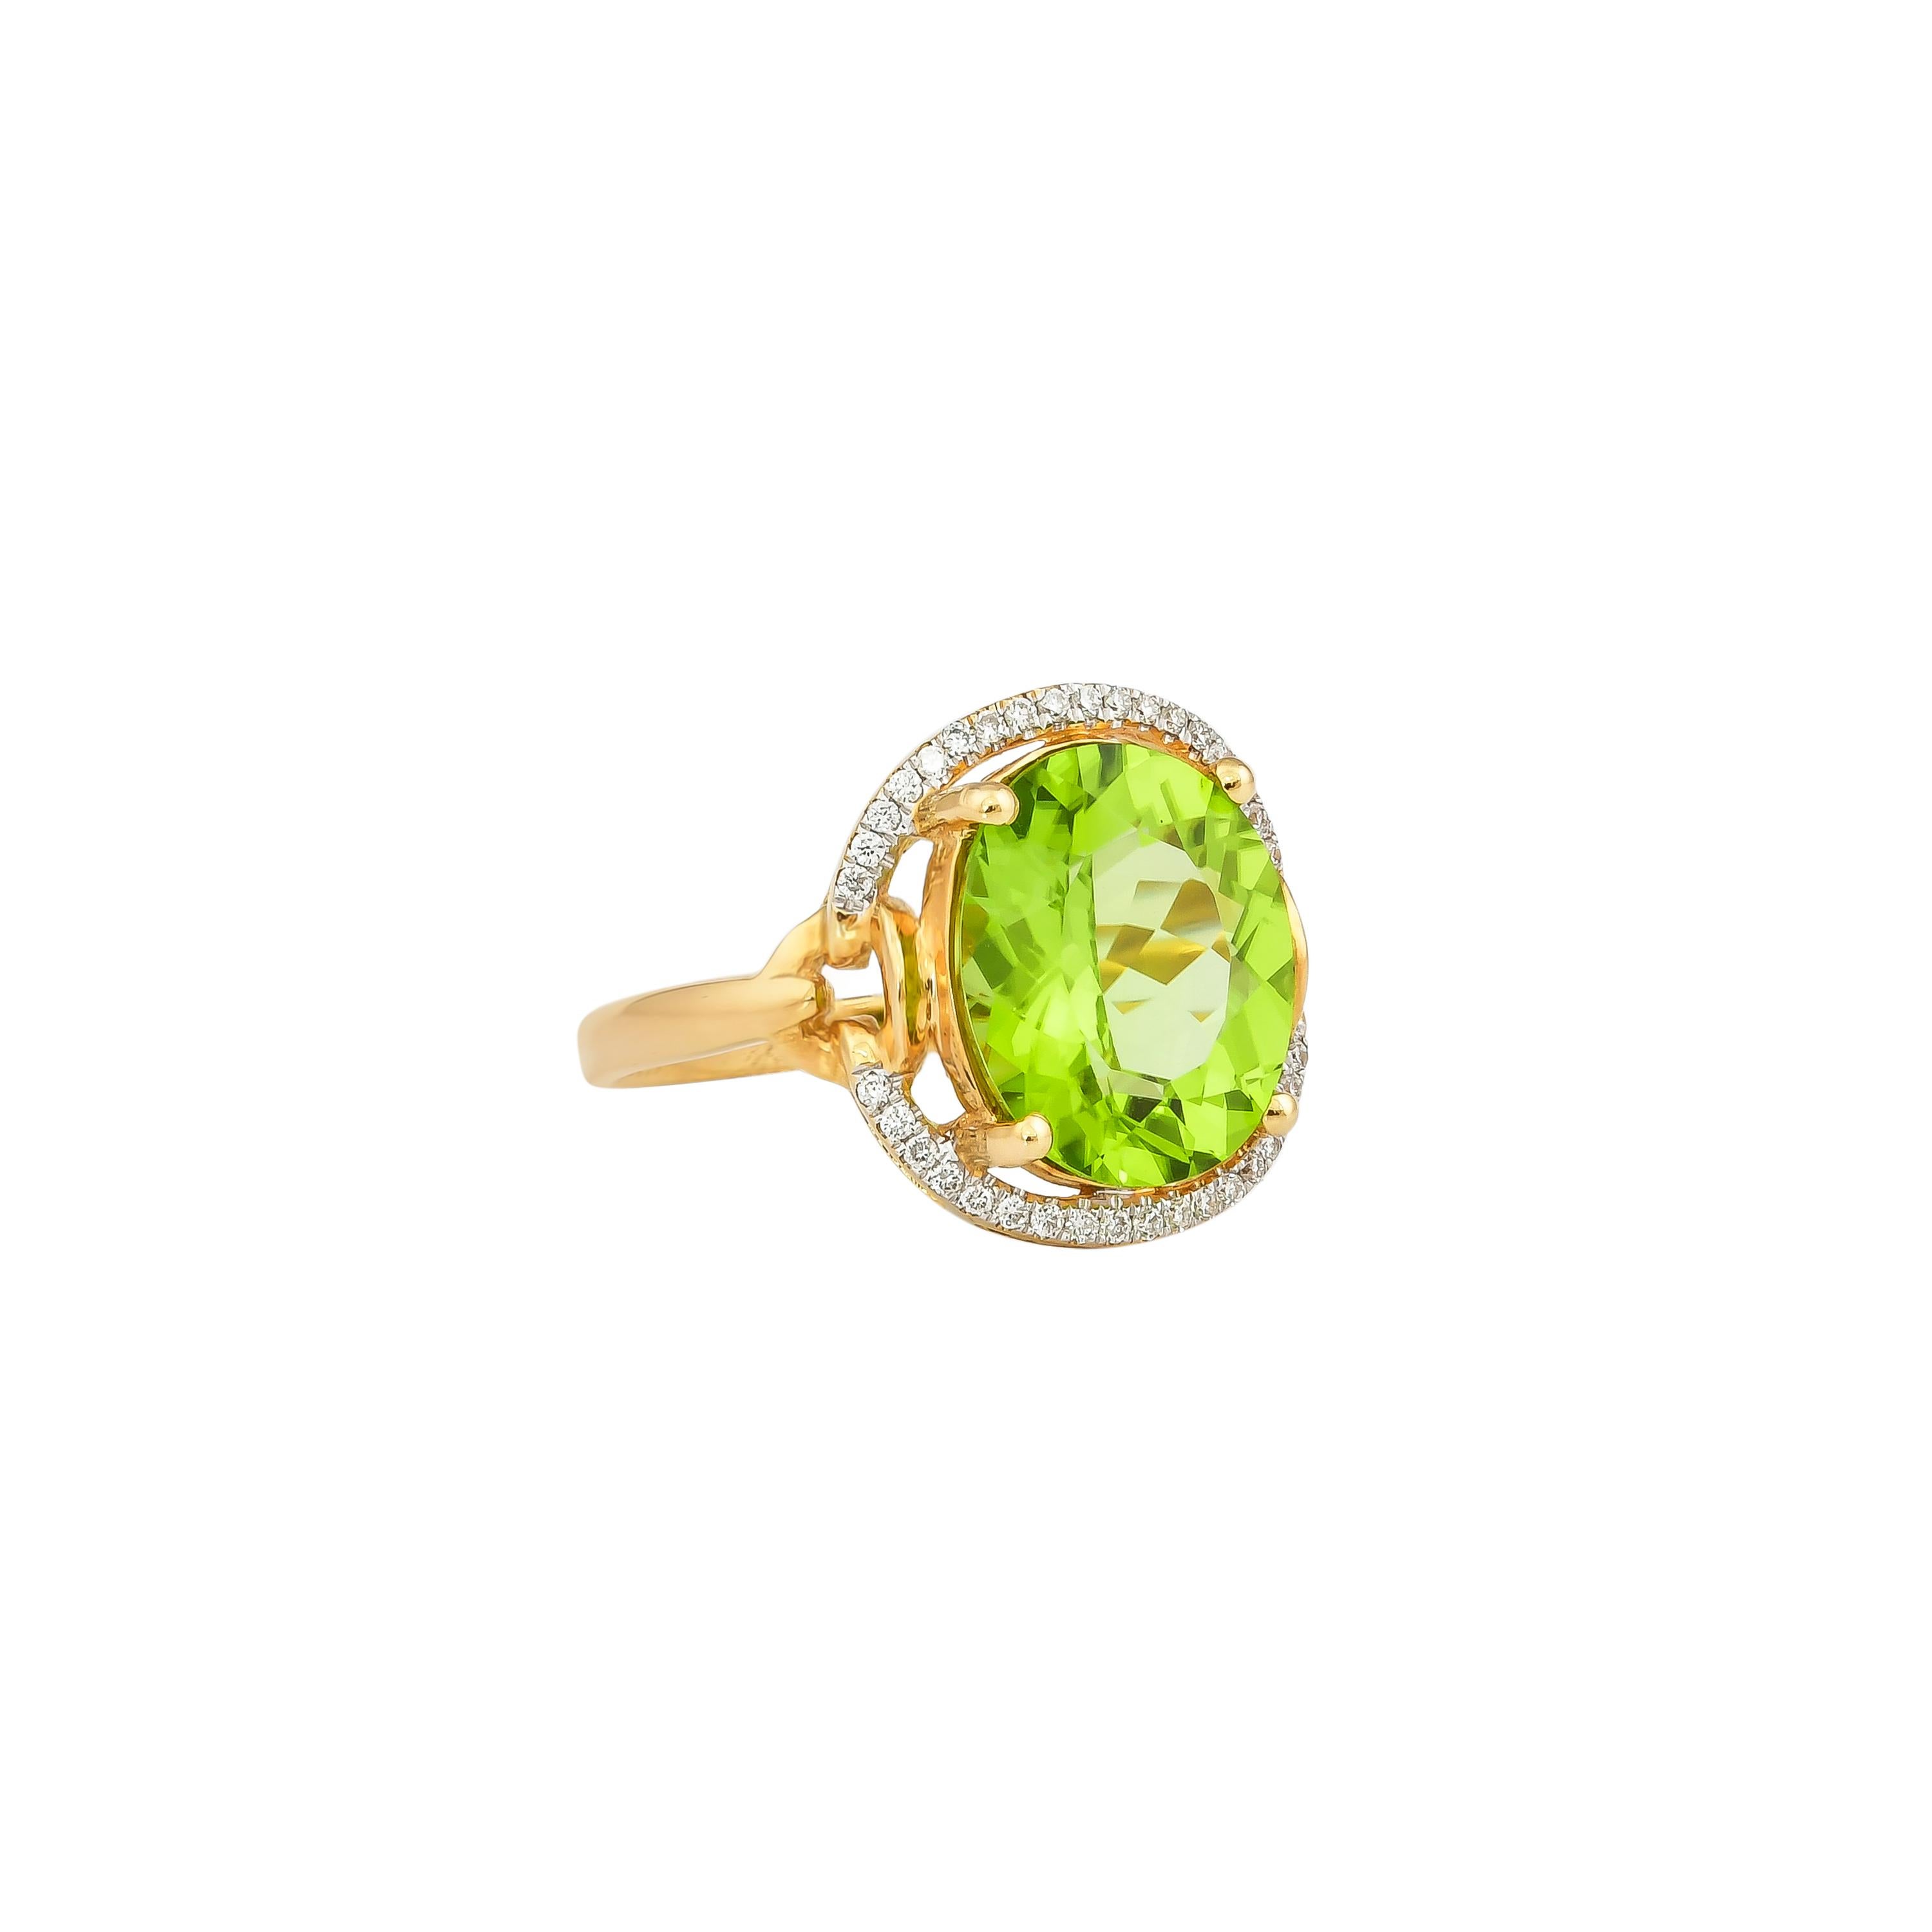 This collection features an array of pretty peridot rings! Accented with diamonds these rings are made in yellow gold and present a vibrant and fresh look. 

Classic peridot ring in 18K yellow gold with diamonds. 

Peridot: 4.46 carat oval